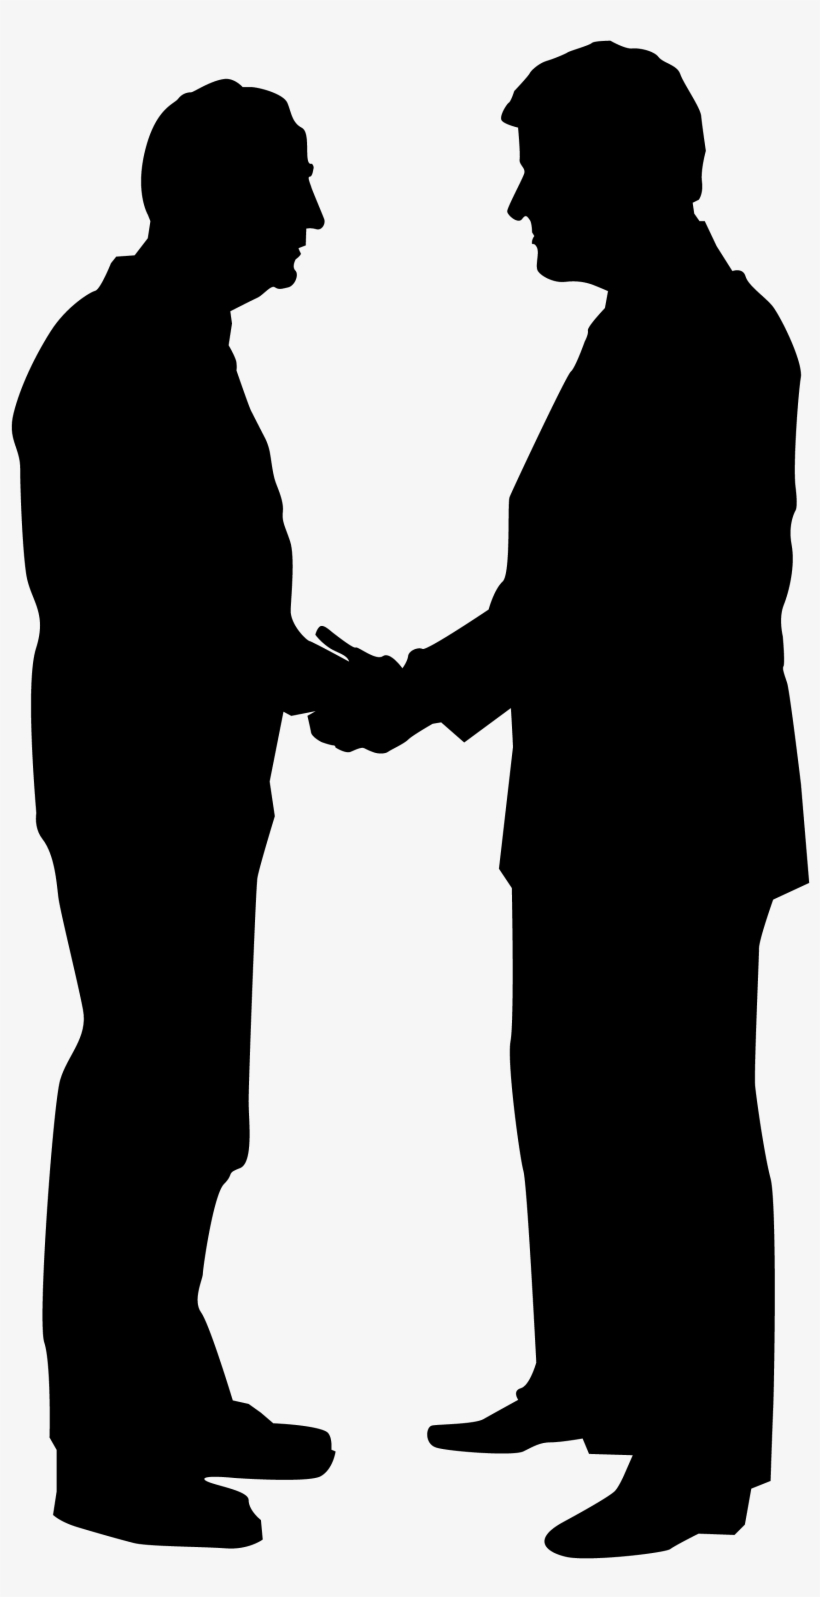 Business People Silhouette - Human Figure Silhouette Png, transparent png #69857